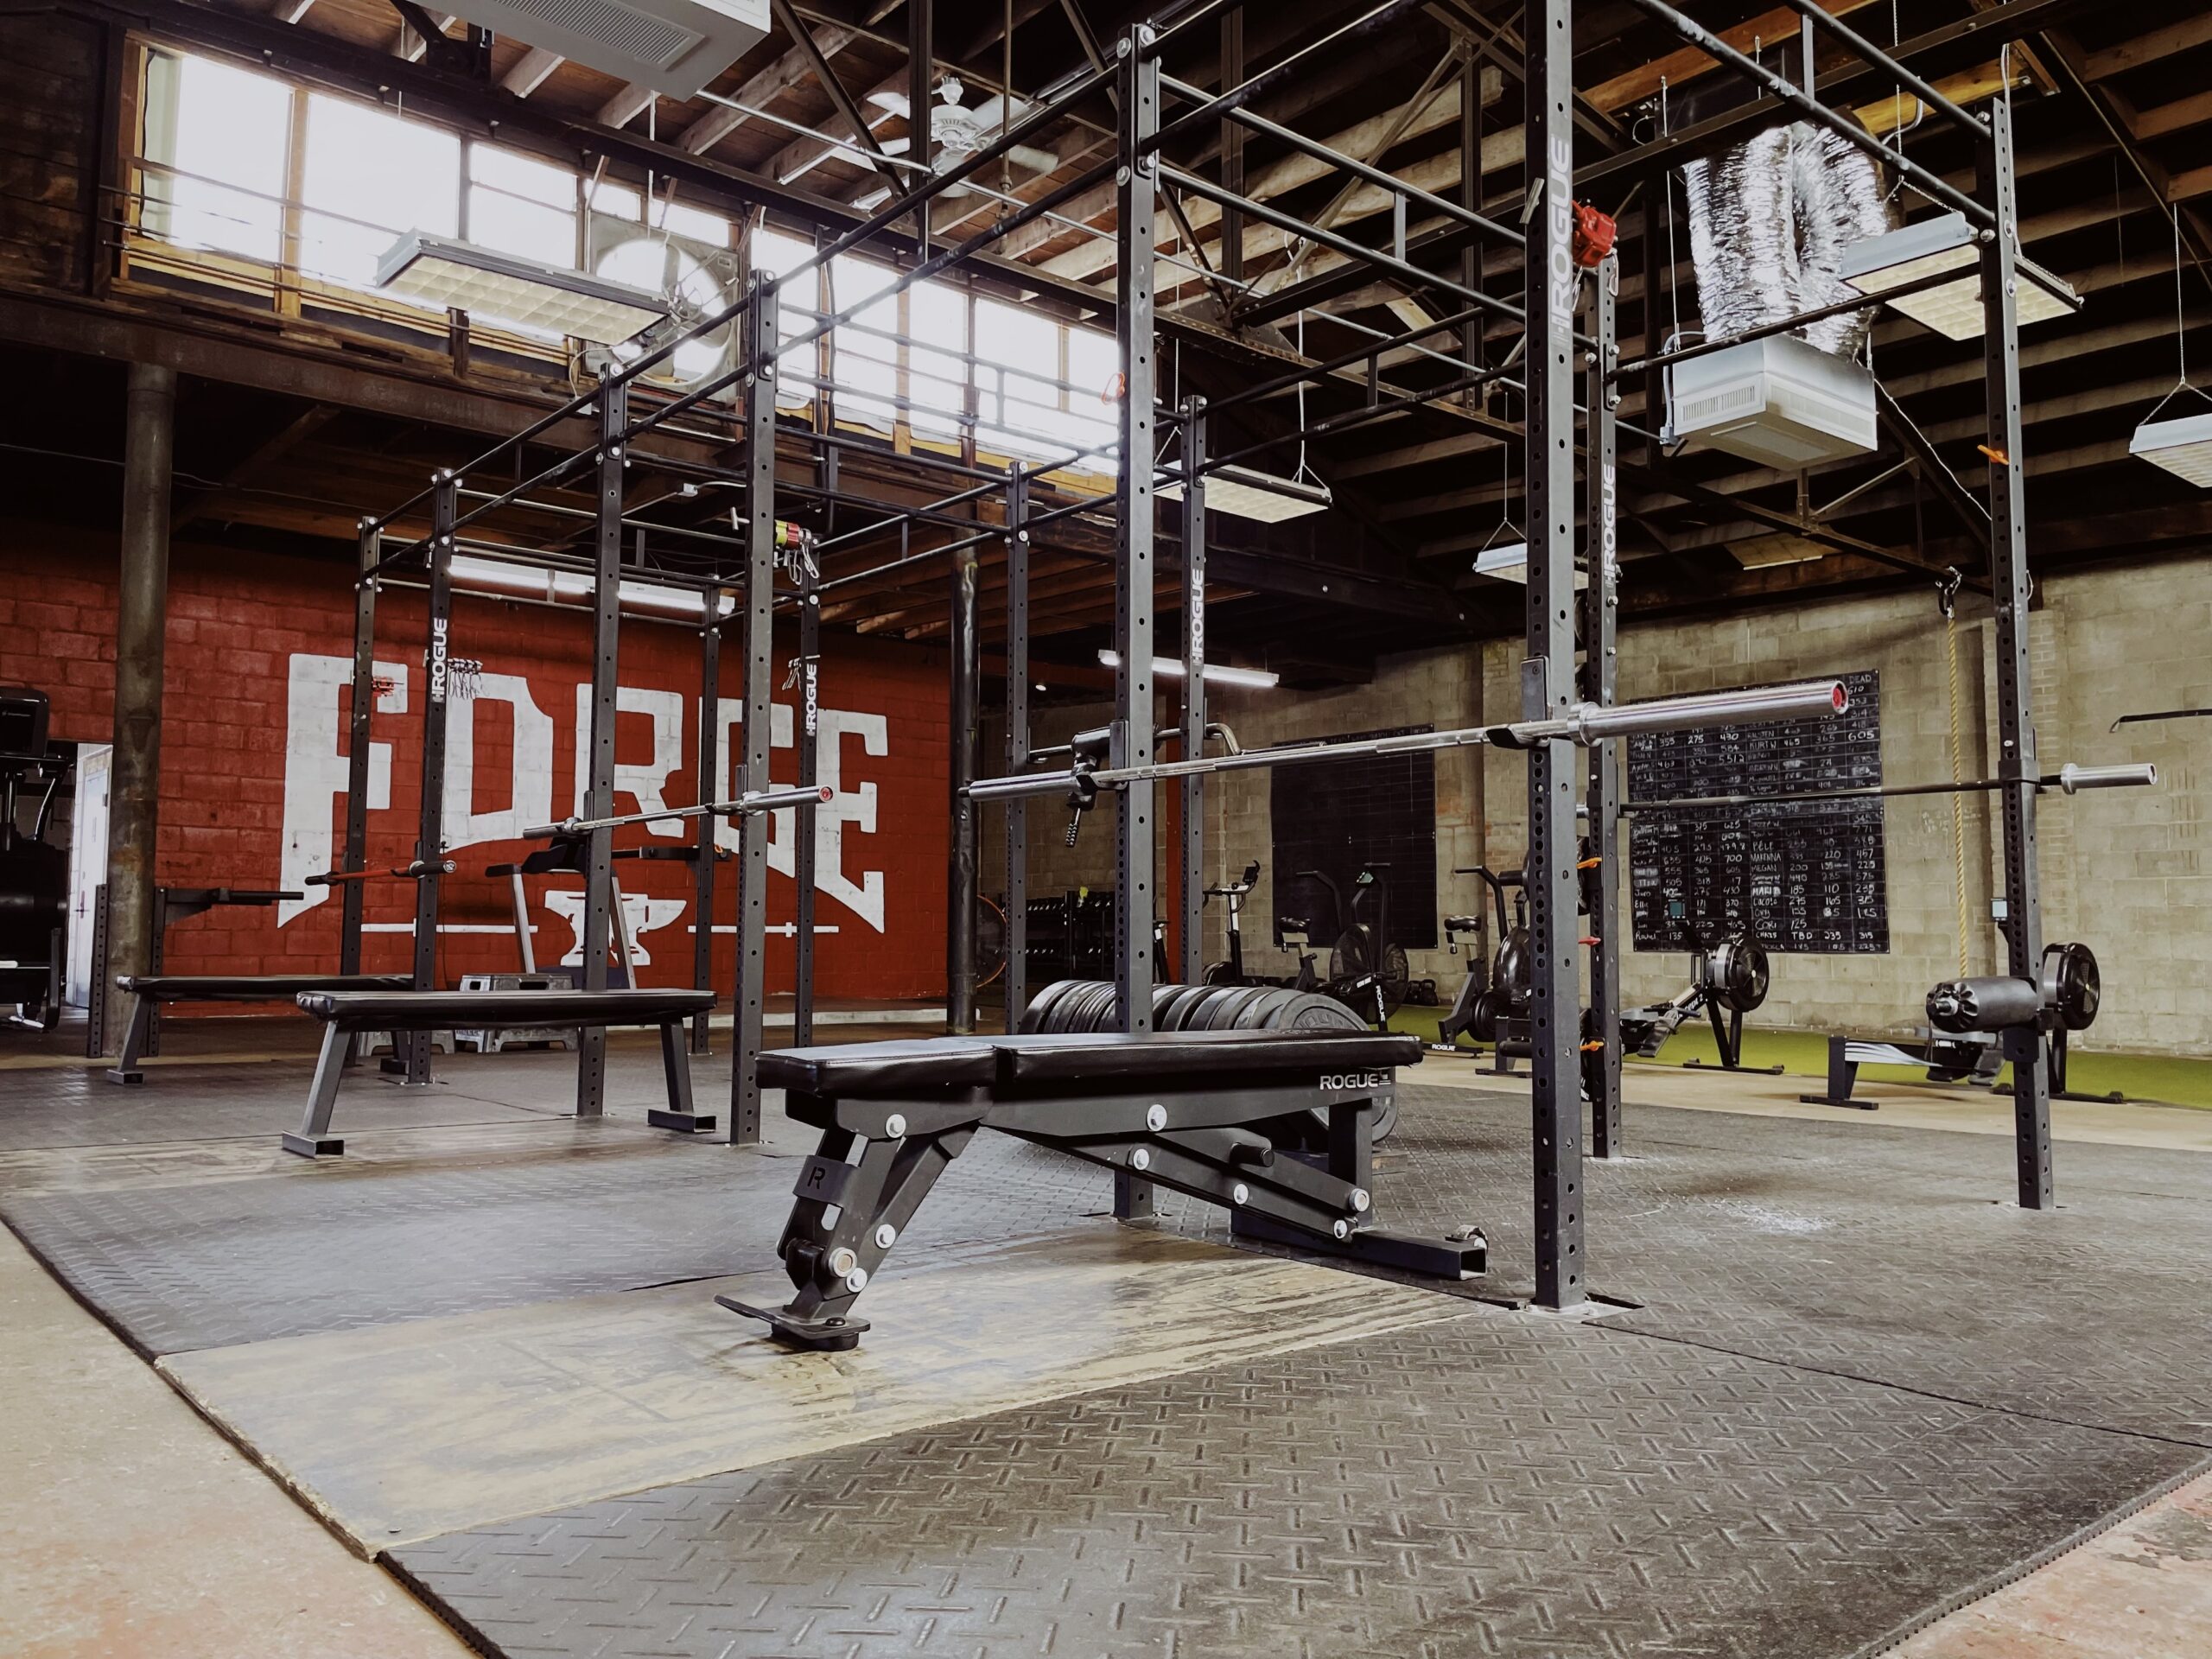 A gym with weights, equipment and a red wall with a painted large logo of Forge Fitness Studio